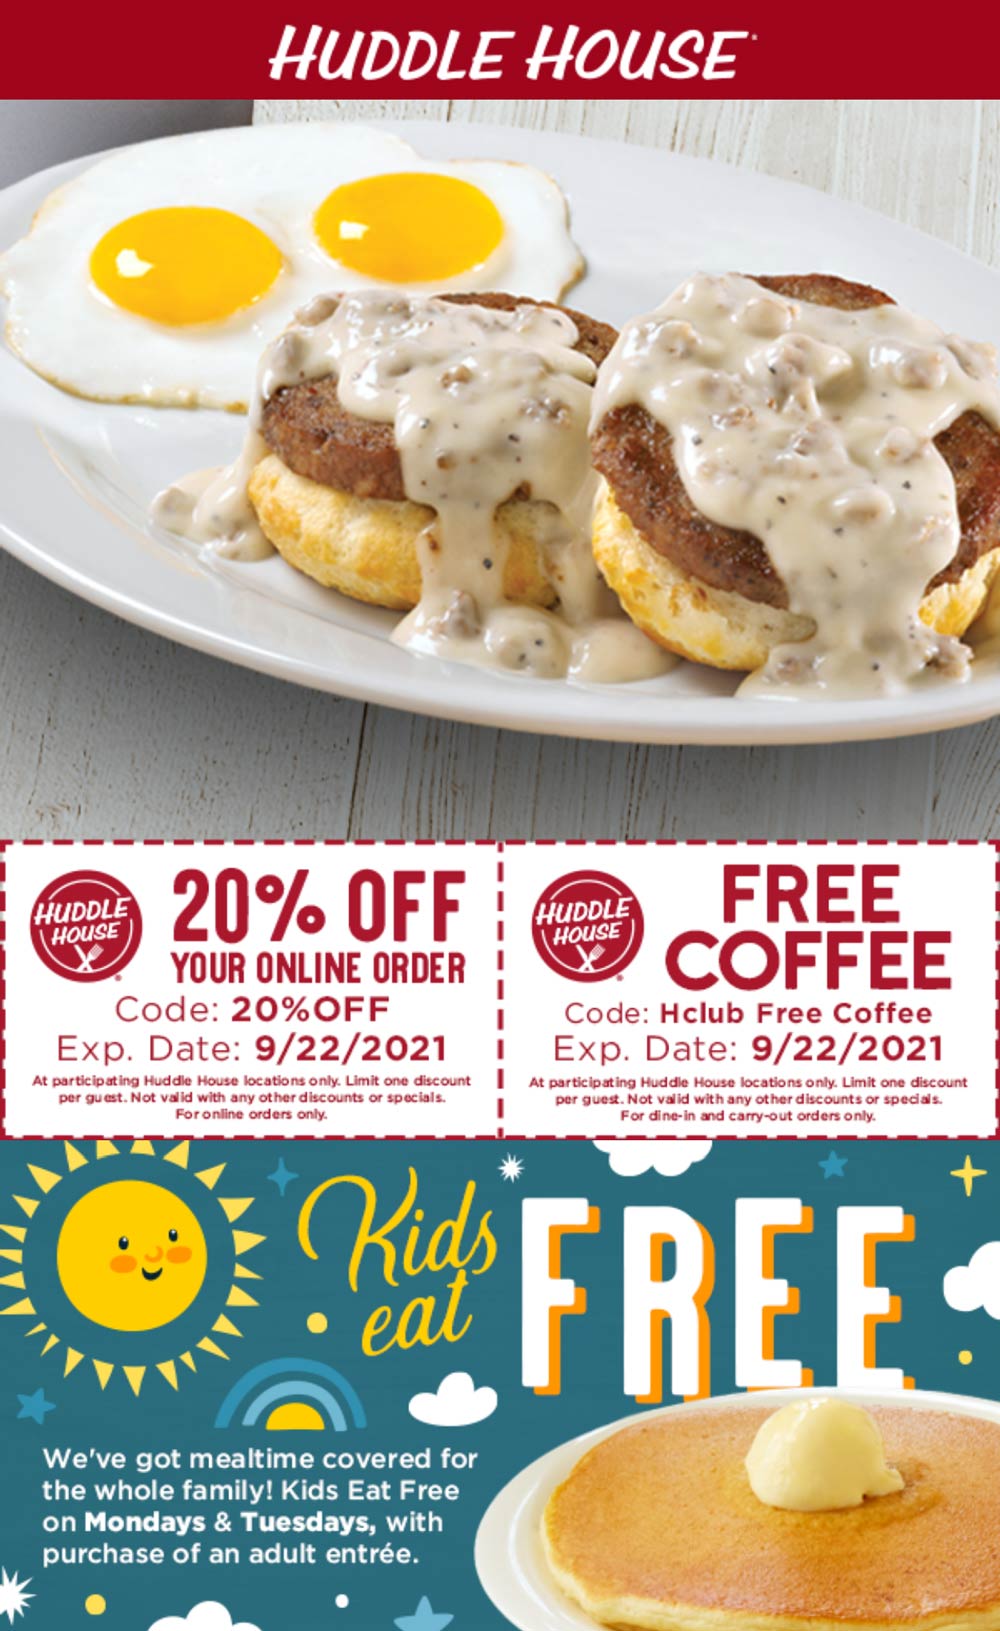 Free coffee & more at Huddle House huddlehouse The Coupons App®